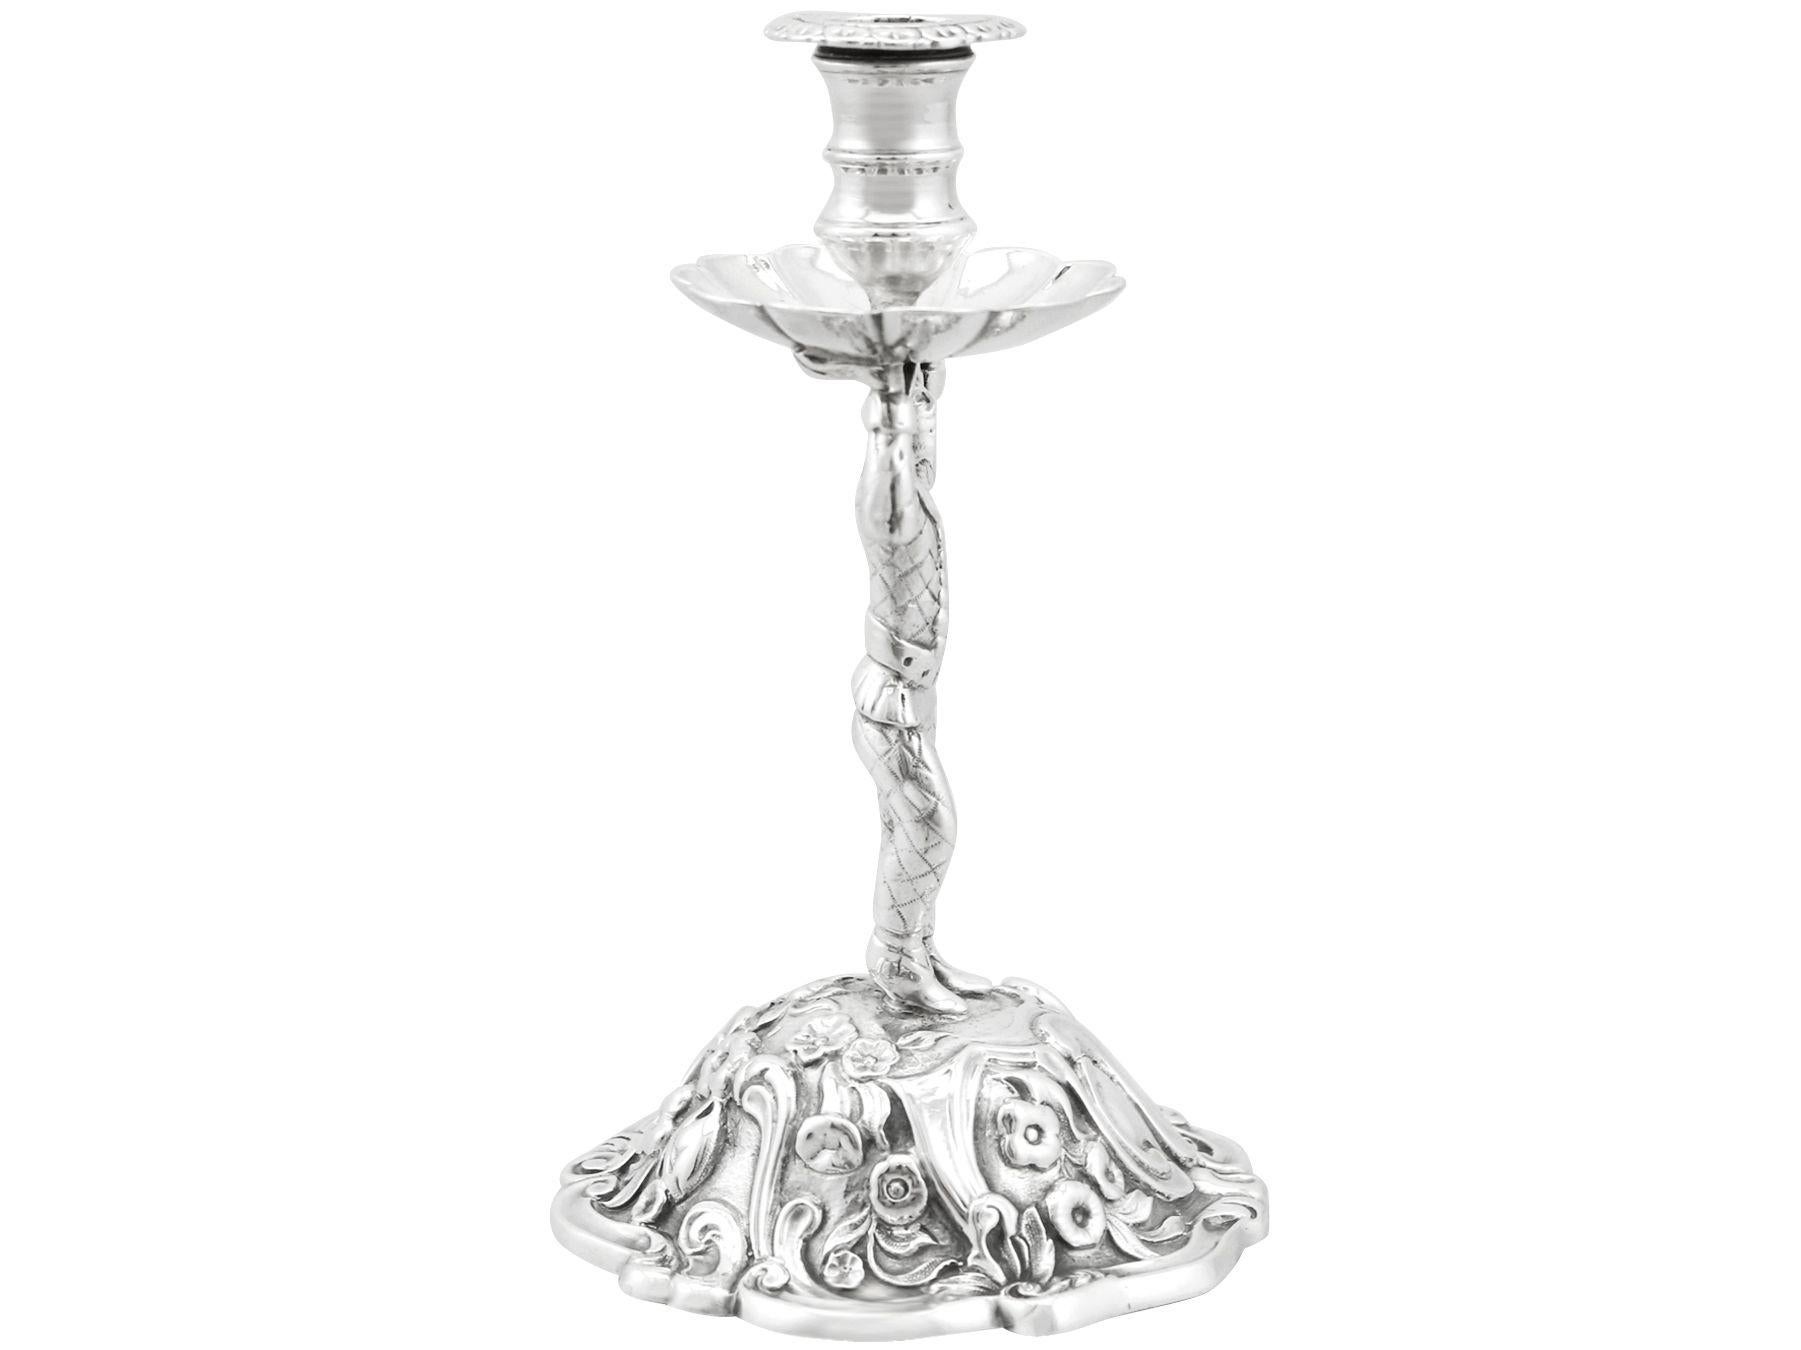 An exceptional, fine and impressive antique Victorian English cast sterling silver taperstick; an addition of our ornamental silverware collection.

This exceptional antique Victorian sterling silver taperstick has a circular rounded form with a